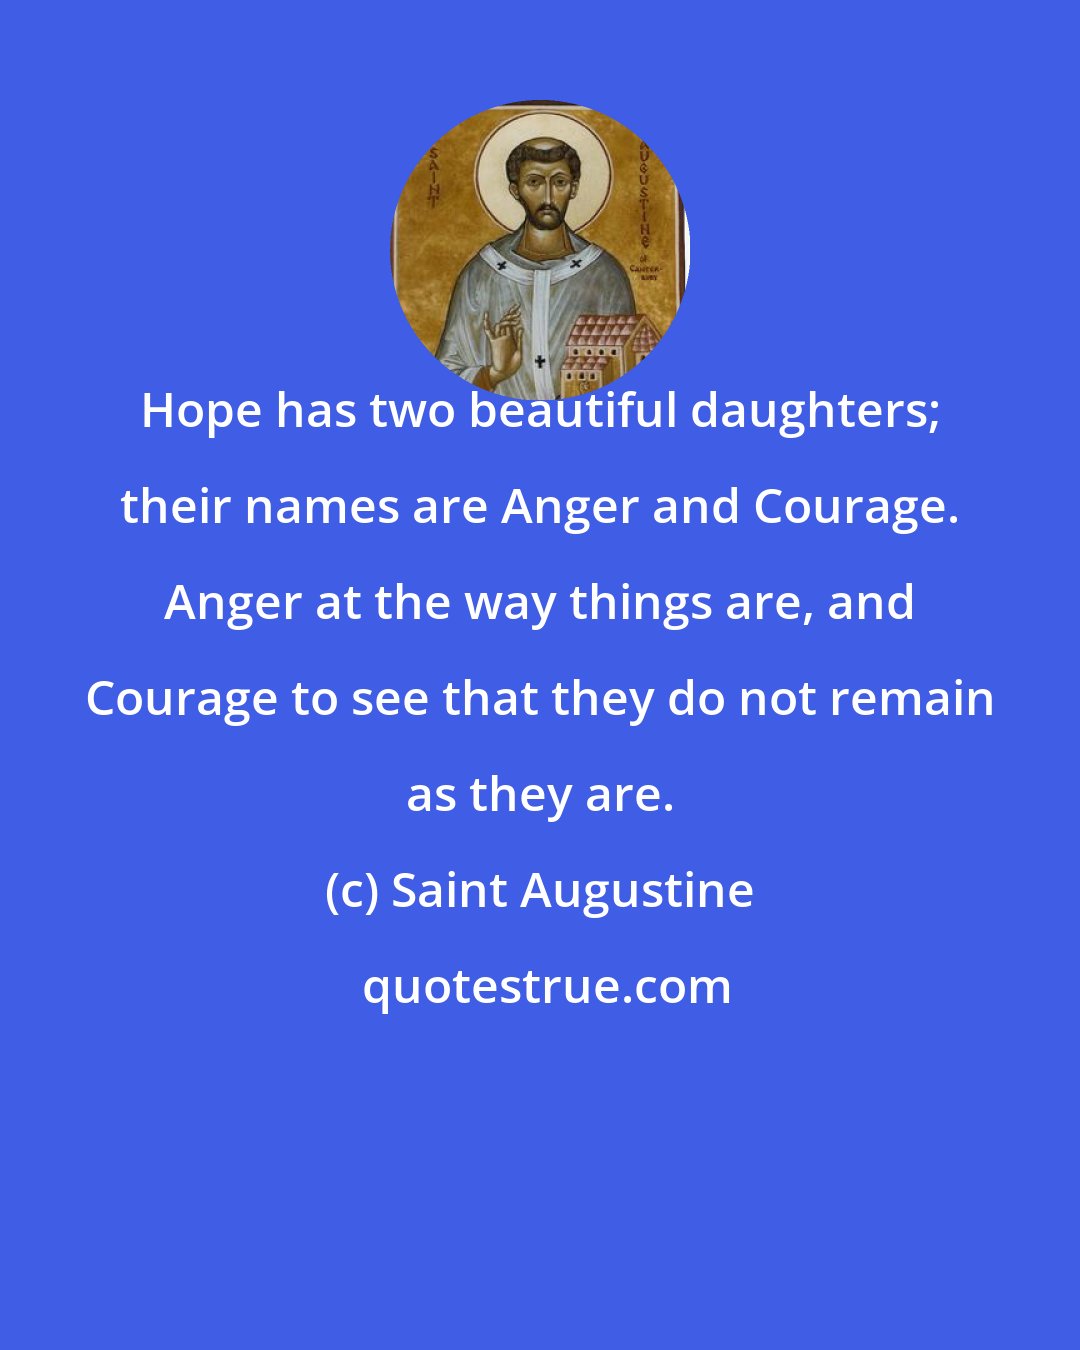 Saint Augustine: Hope has two beautiful daughters; their names are Anger and Courage. Anger at the way things are, and Courage to see that they do not remain as they are.